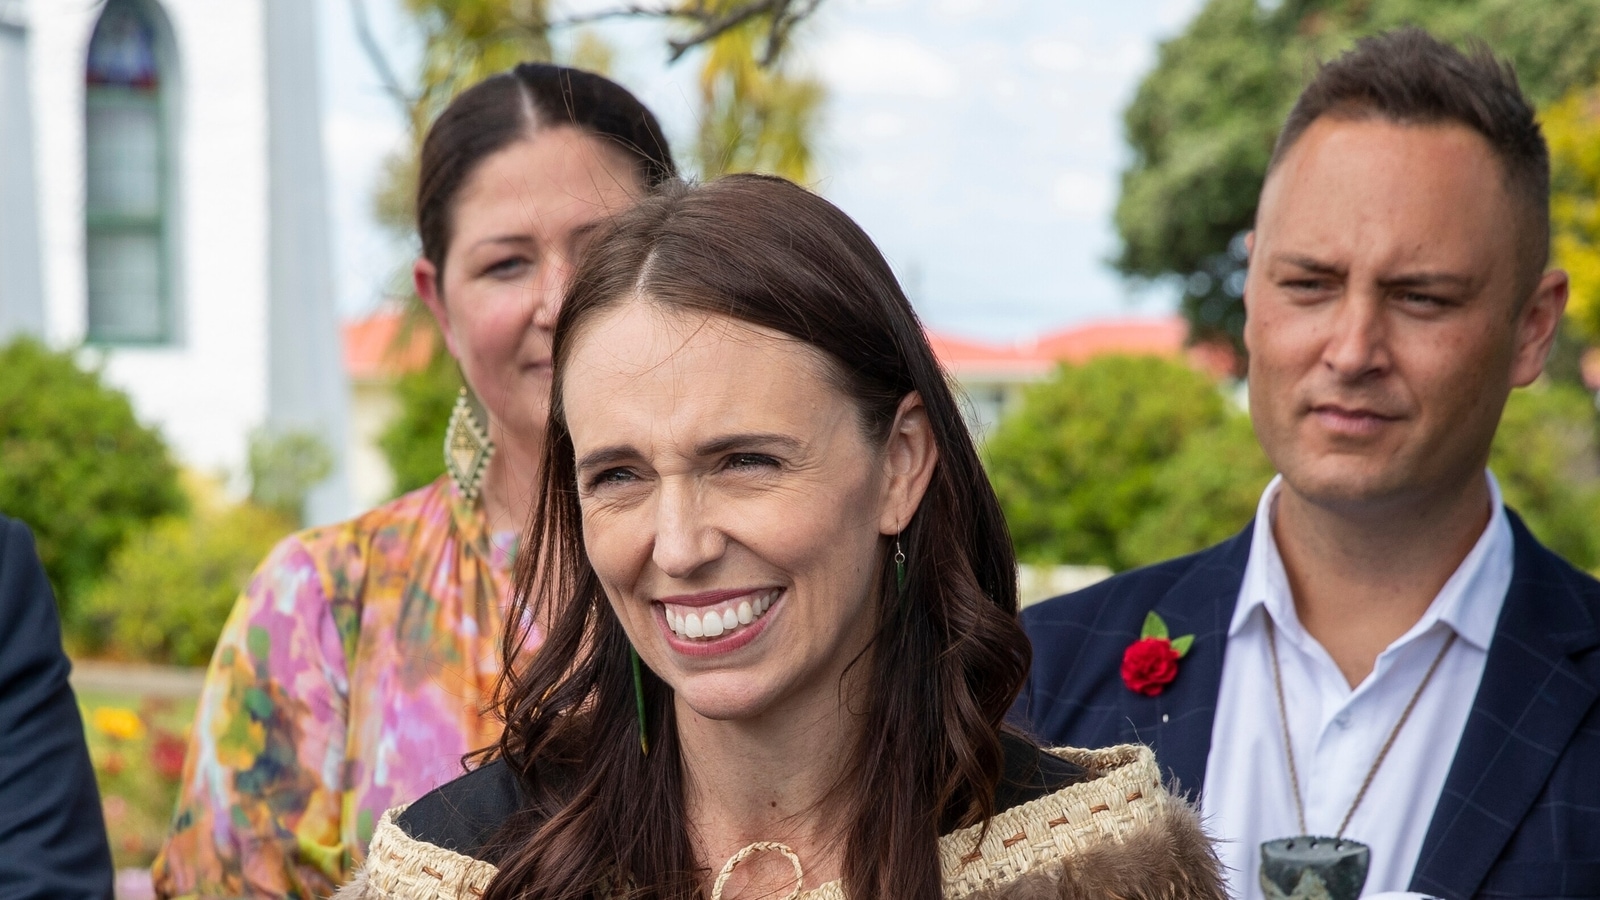 During her last appearance as New Zealand PM, Jacinda Ardern gave this advice to successor Hipkins